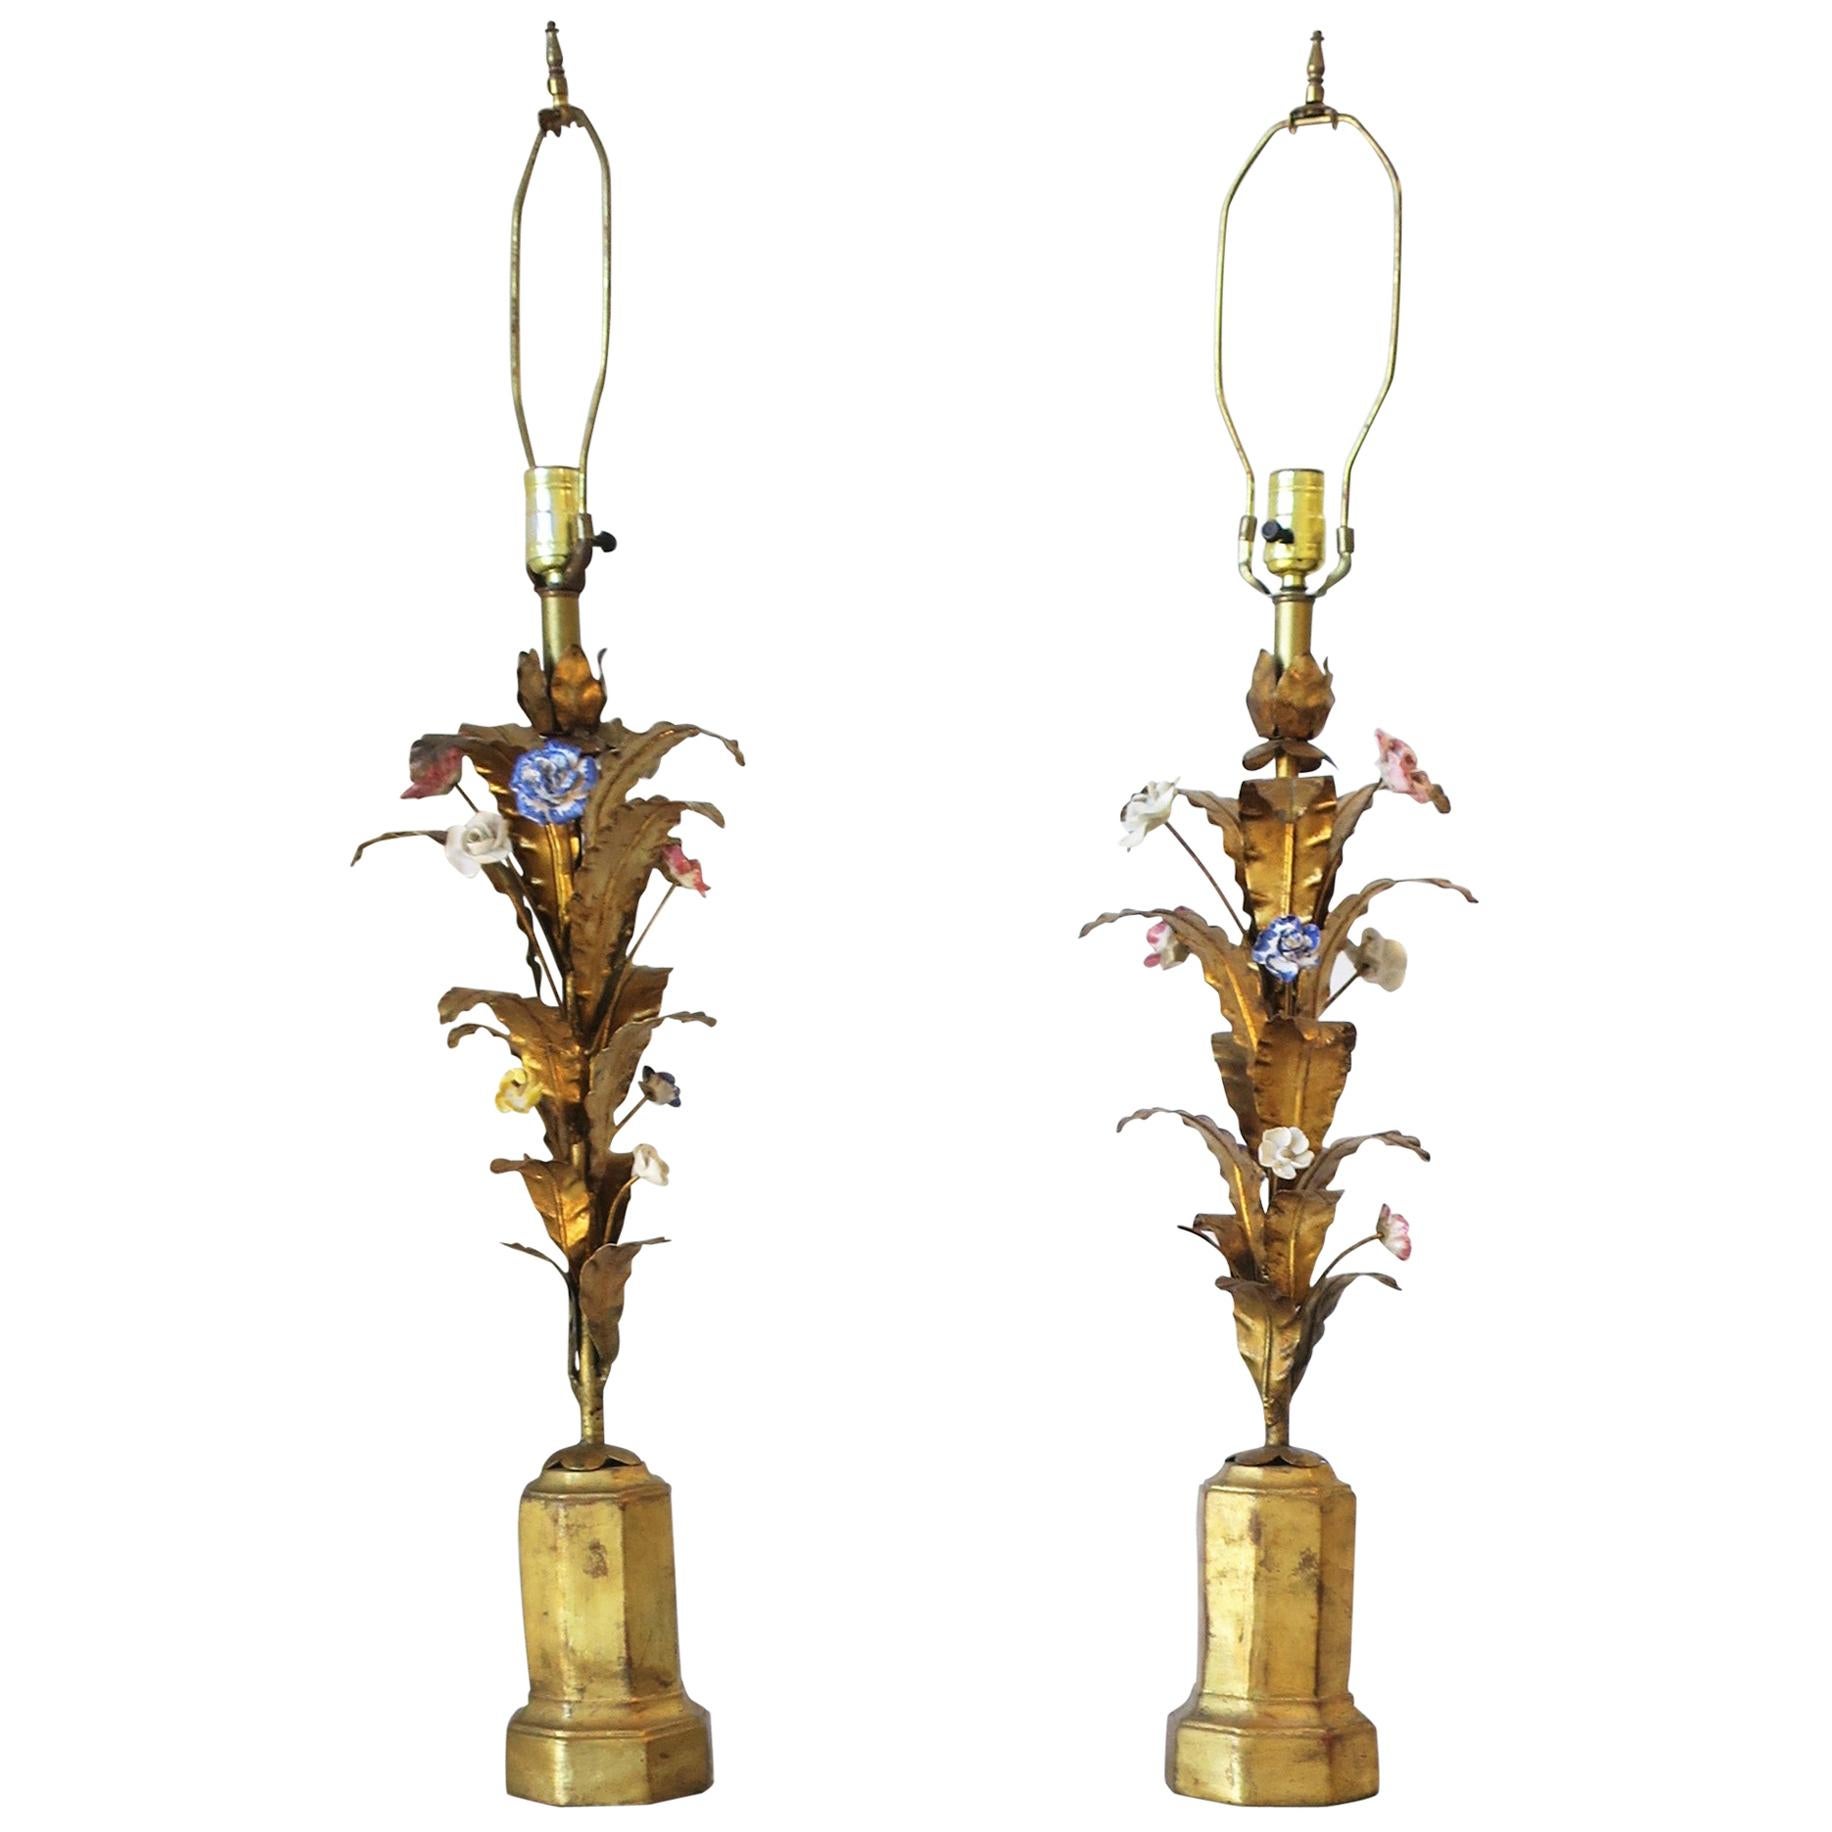 Italian Gold Gilt Tole Table Lamps, Pair